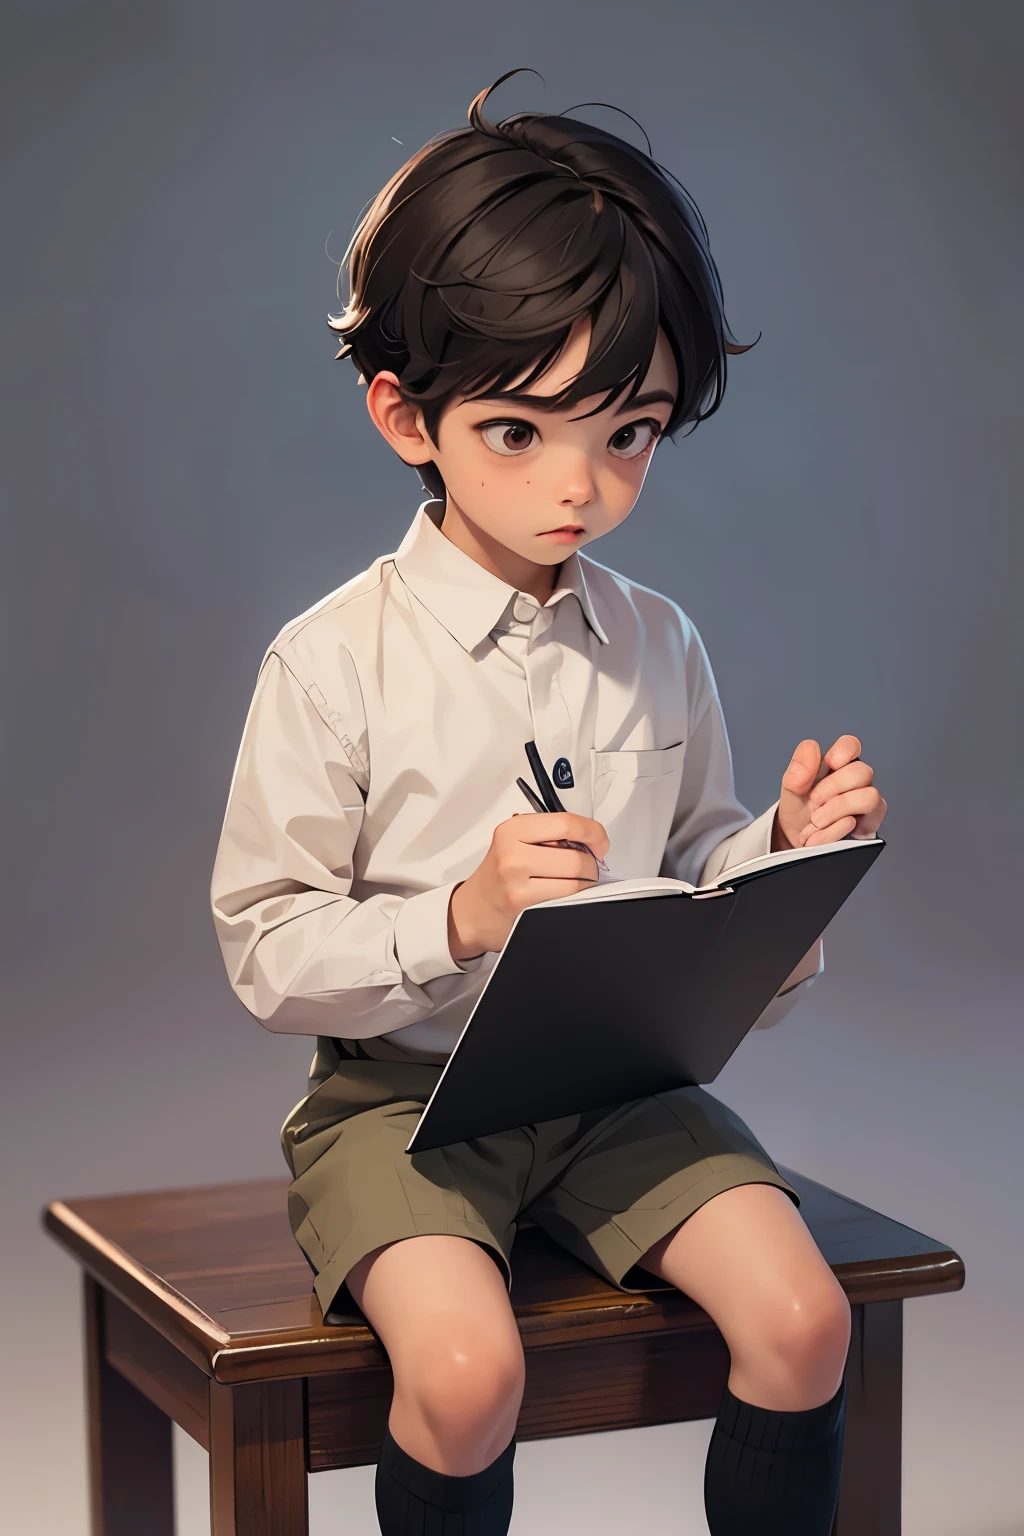 A boy studying image in animation